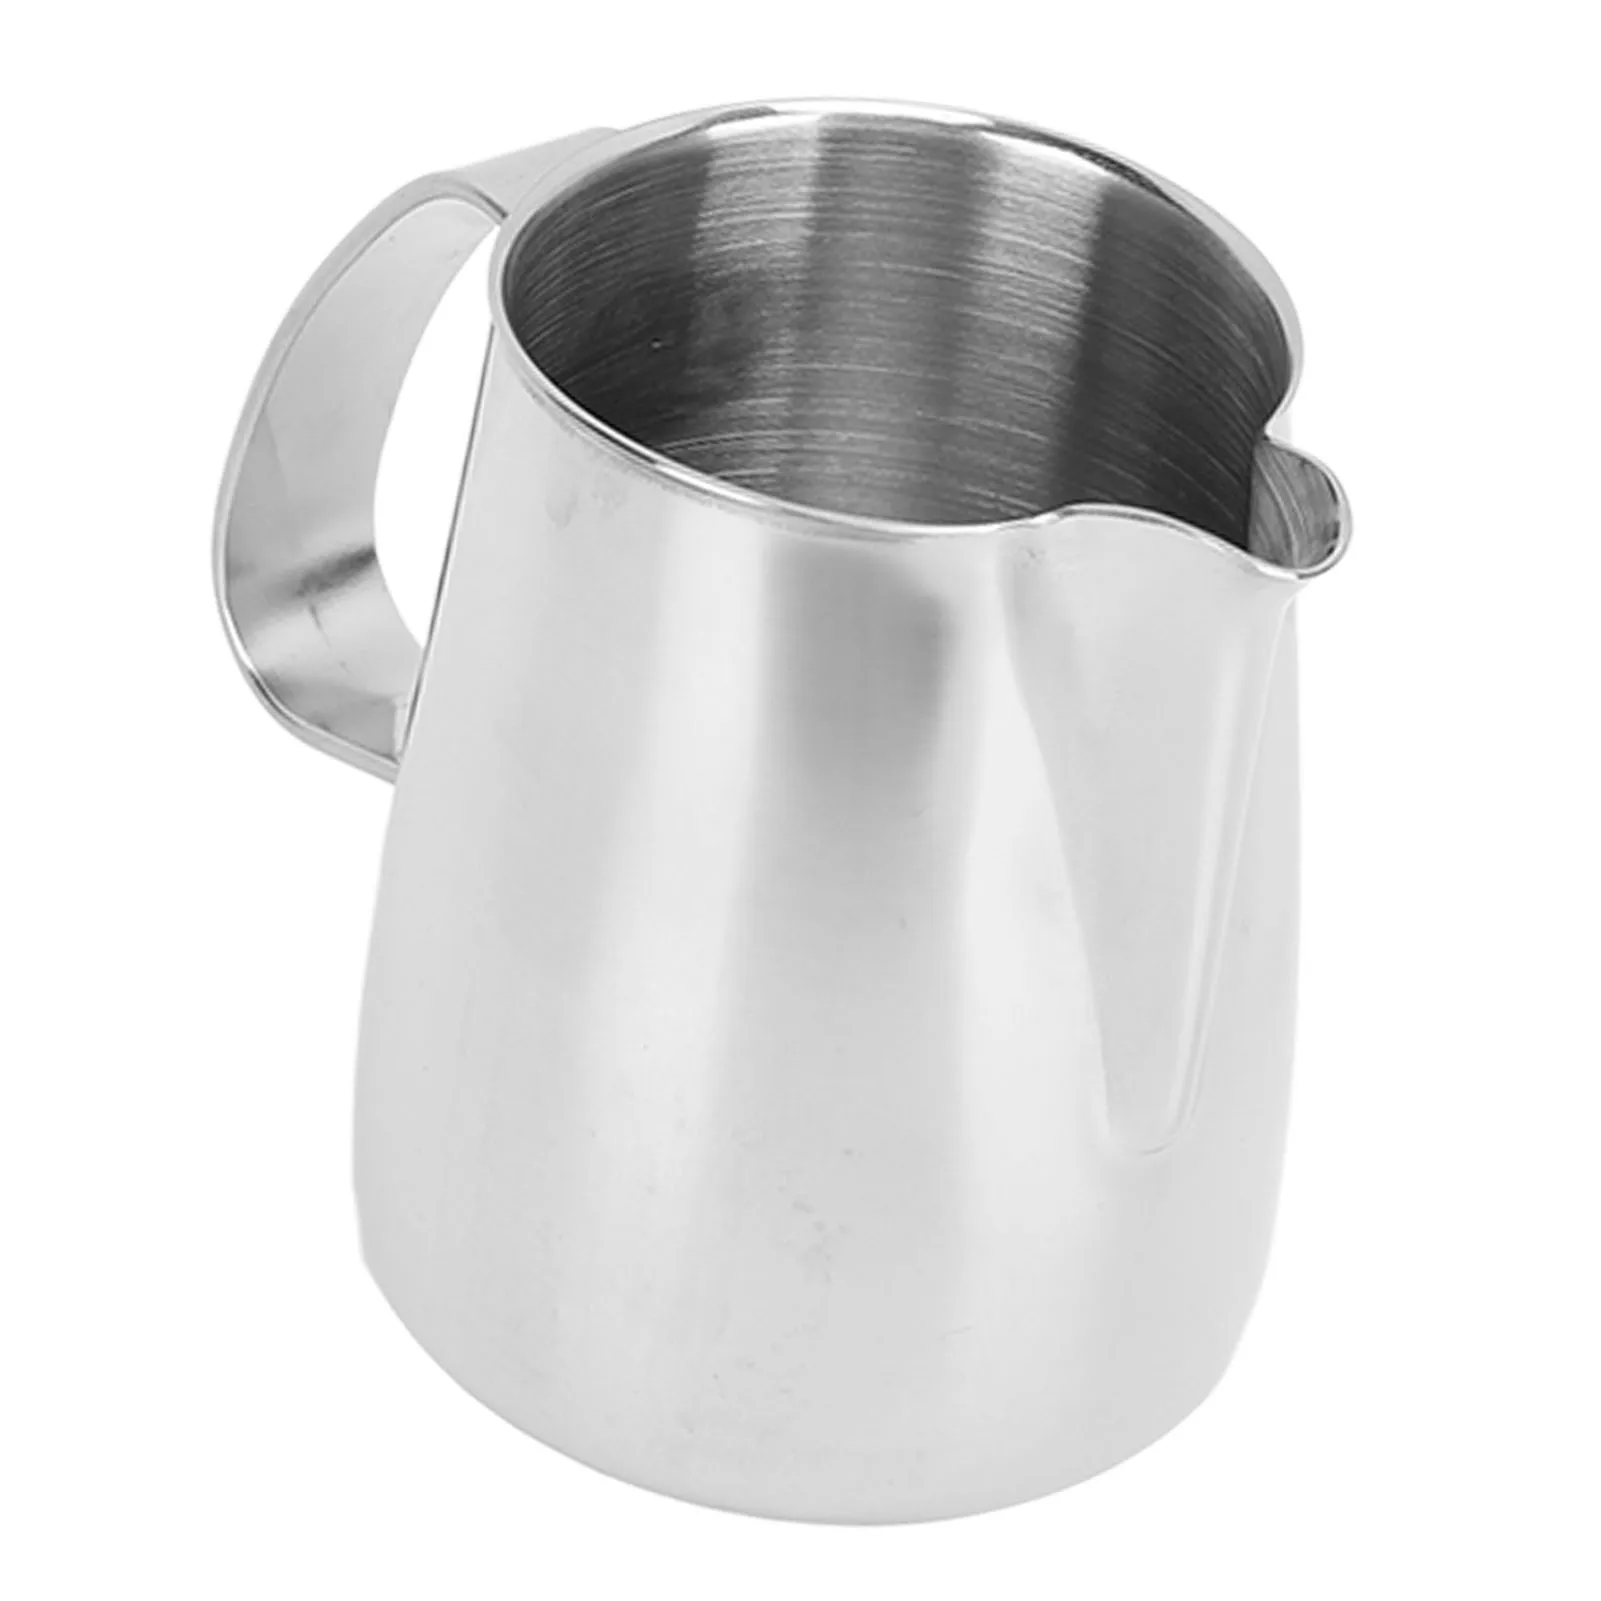 https://ae01.alicdn.com/kf/Sf314b39f6a344d789d031f054c8619a3F/Frothing-Cup-304-Stainless-Steel-Drip-Pointed-Spout-Integrated-Milk-Frother-Cup-Coffee-Steaming-Pitcher-Steaming.jpg